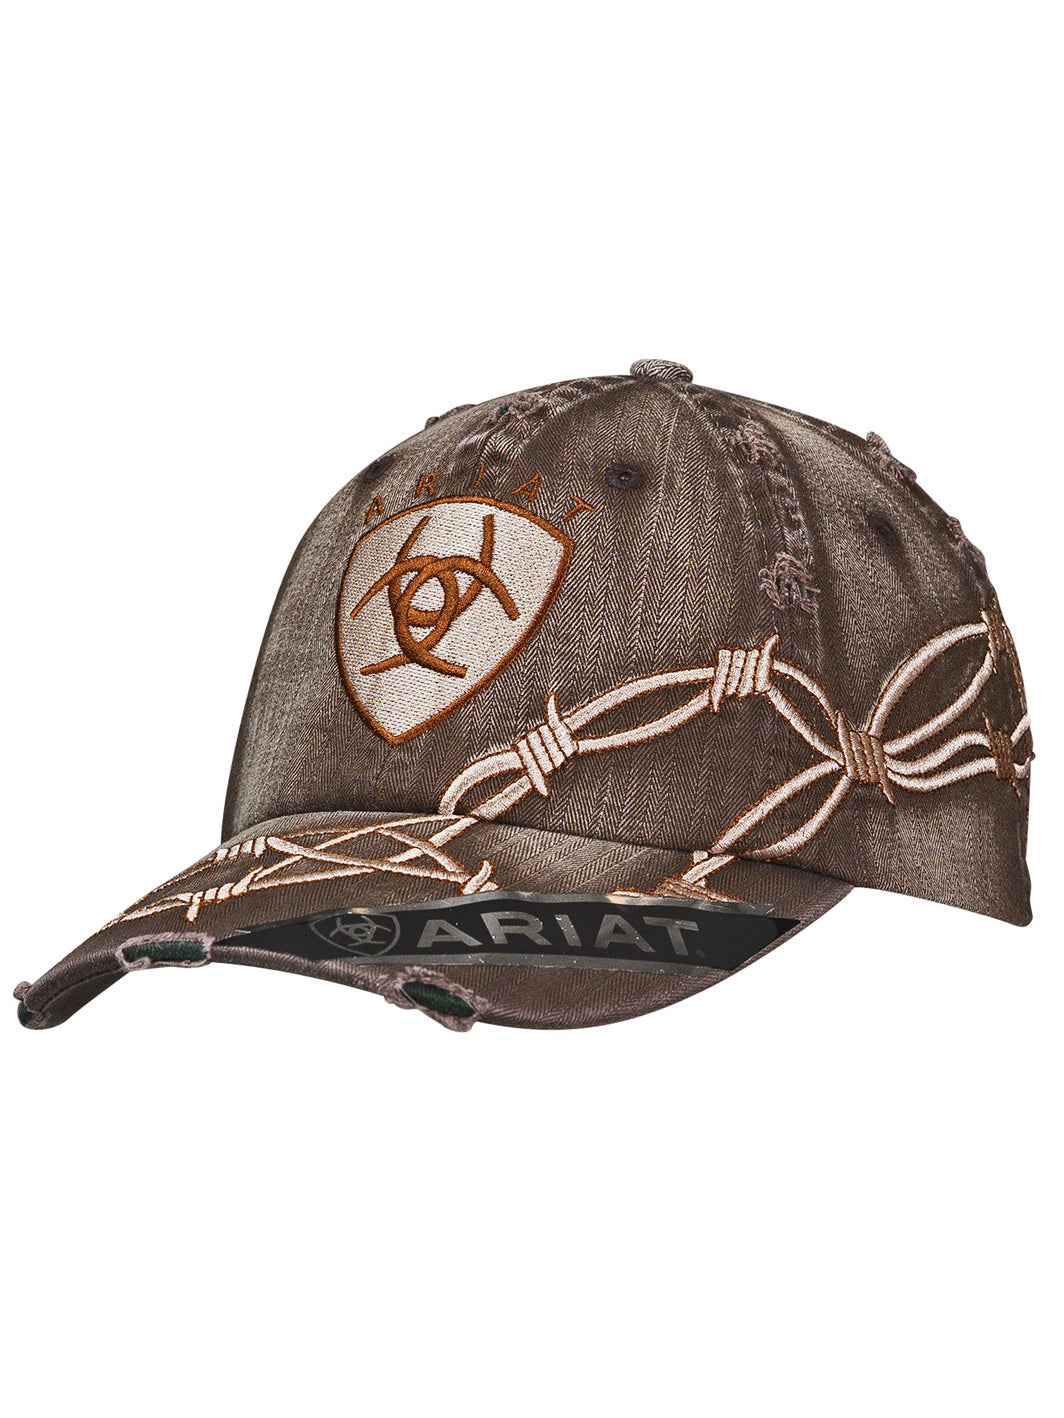 Ariat 1509802 Barbed Wire Cap in Brown Front View